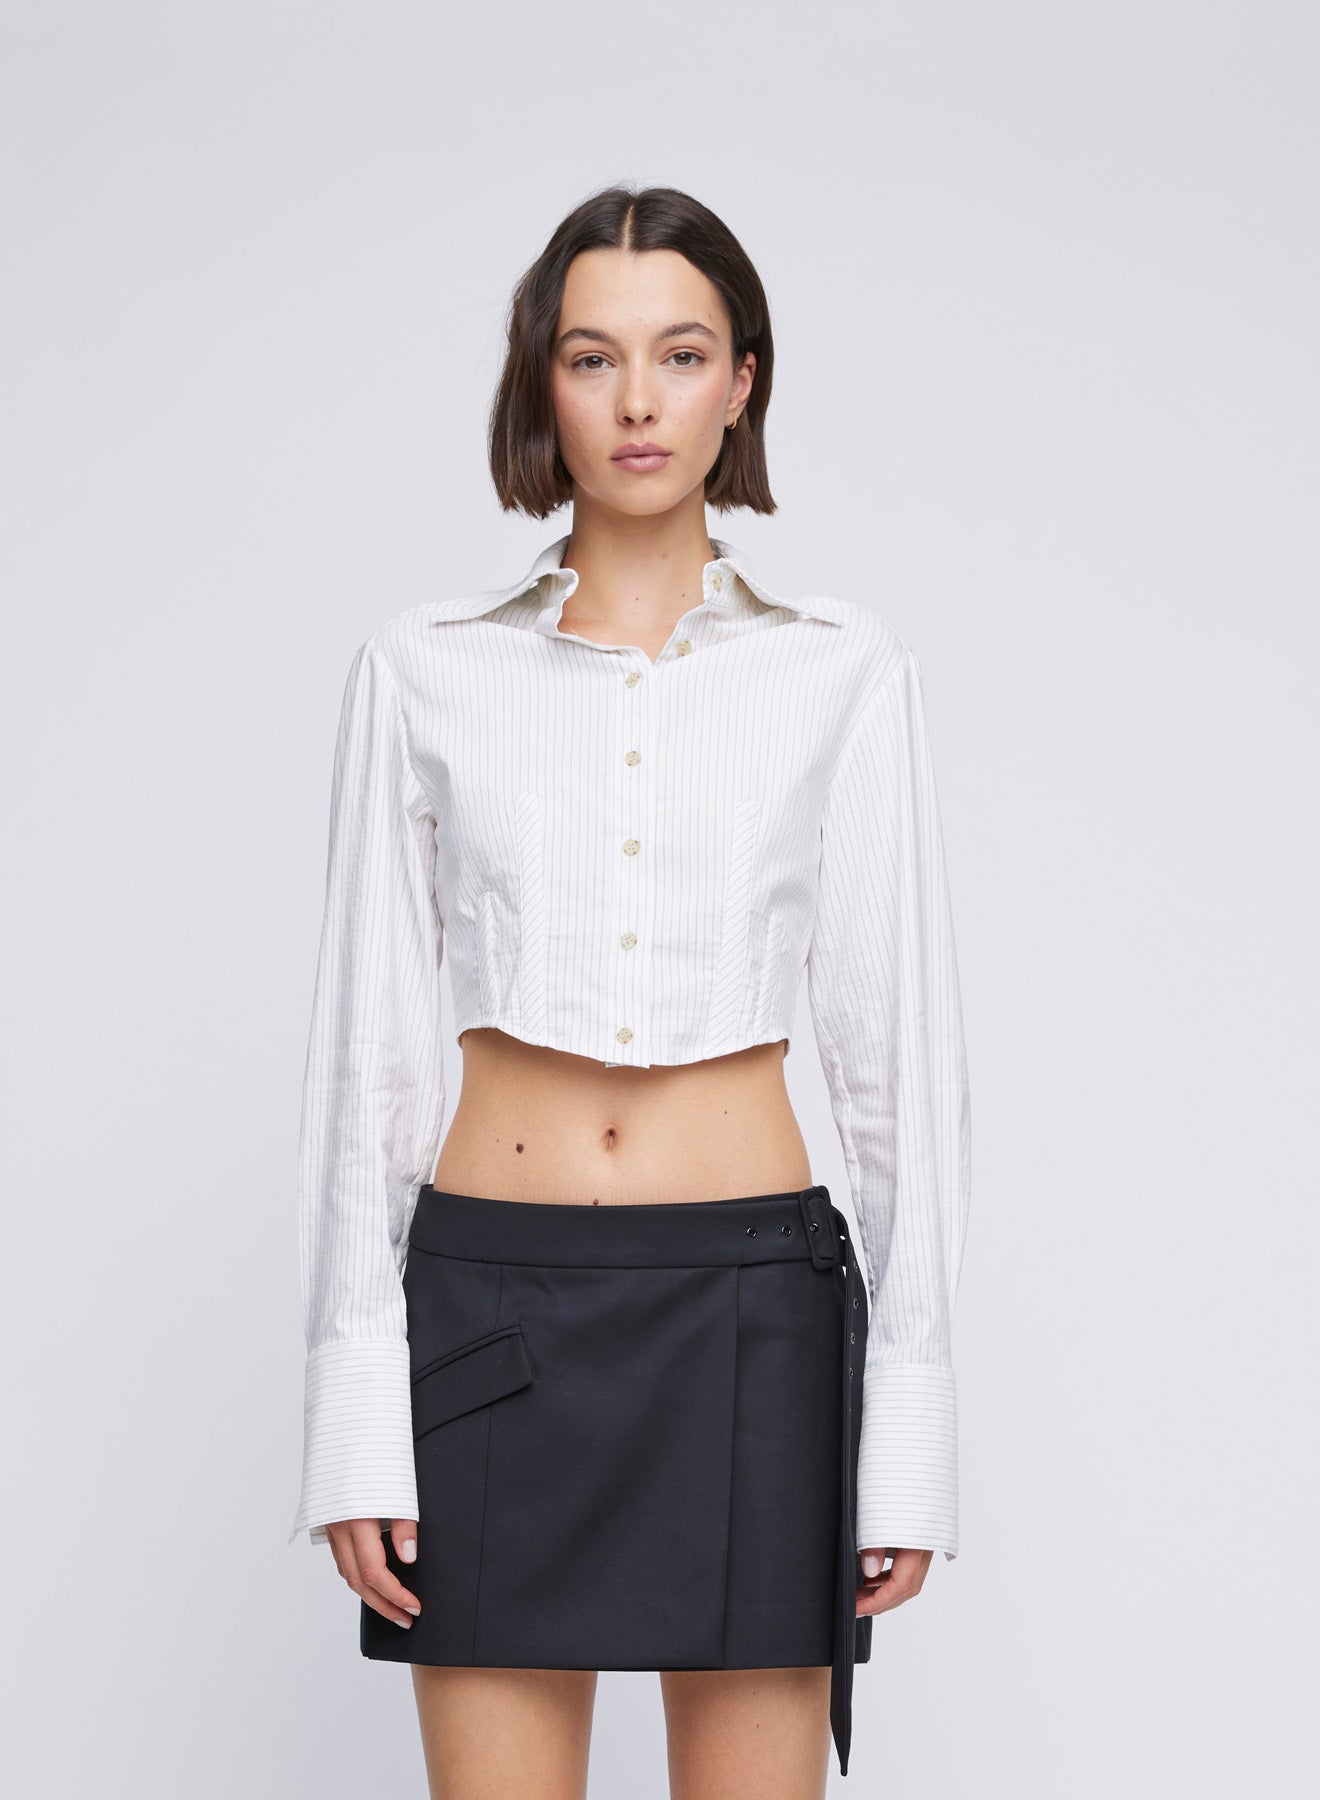 ANNA QUAN Cropped Stretch Cotton Shirt, enhanced with boning inserts for a contemporary twist. This cropped shirt is a statement piece, designed to elevate your everyday dressing with its unique boning inserts. White shirts, work shirts, cool work shirts, everyday work shirts, everyday cotton shirts, cropped shirts, oversized cropped shirt.